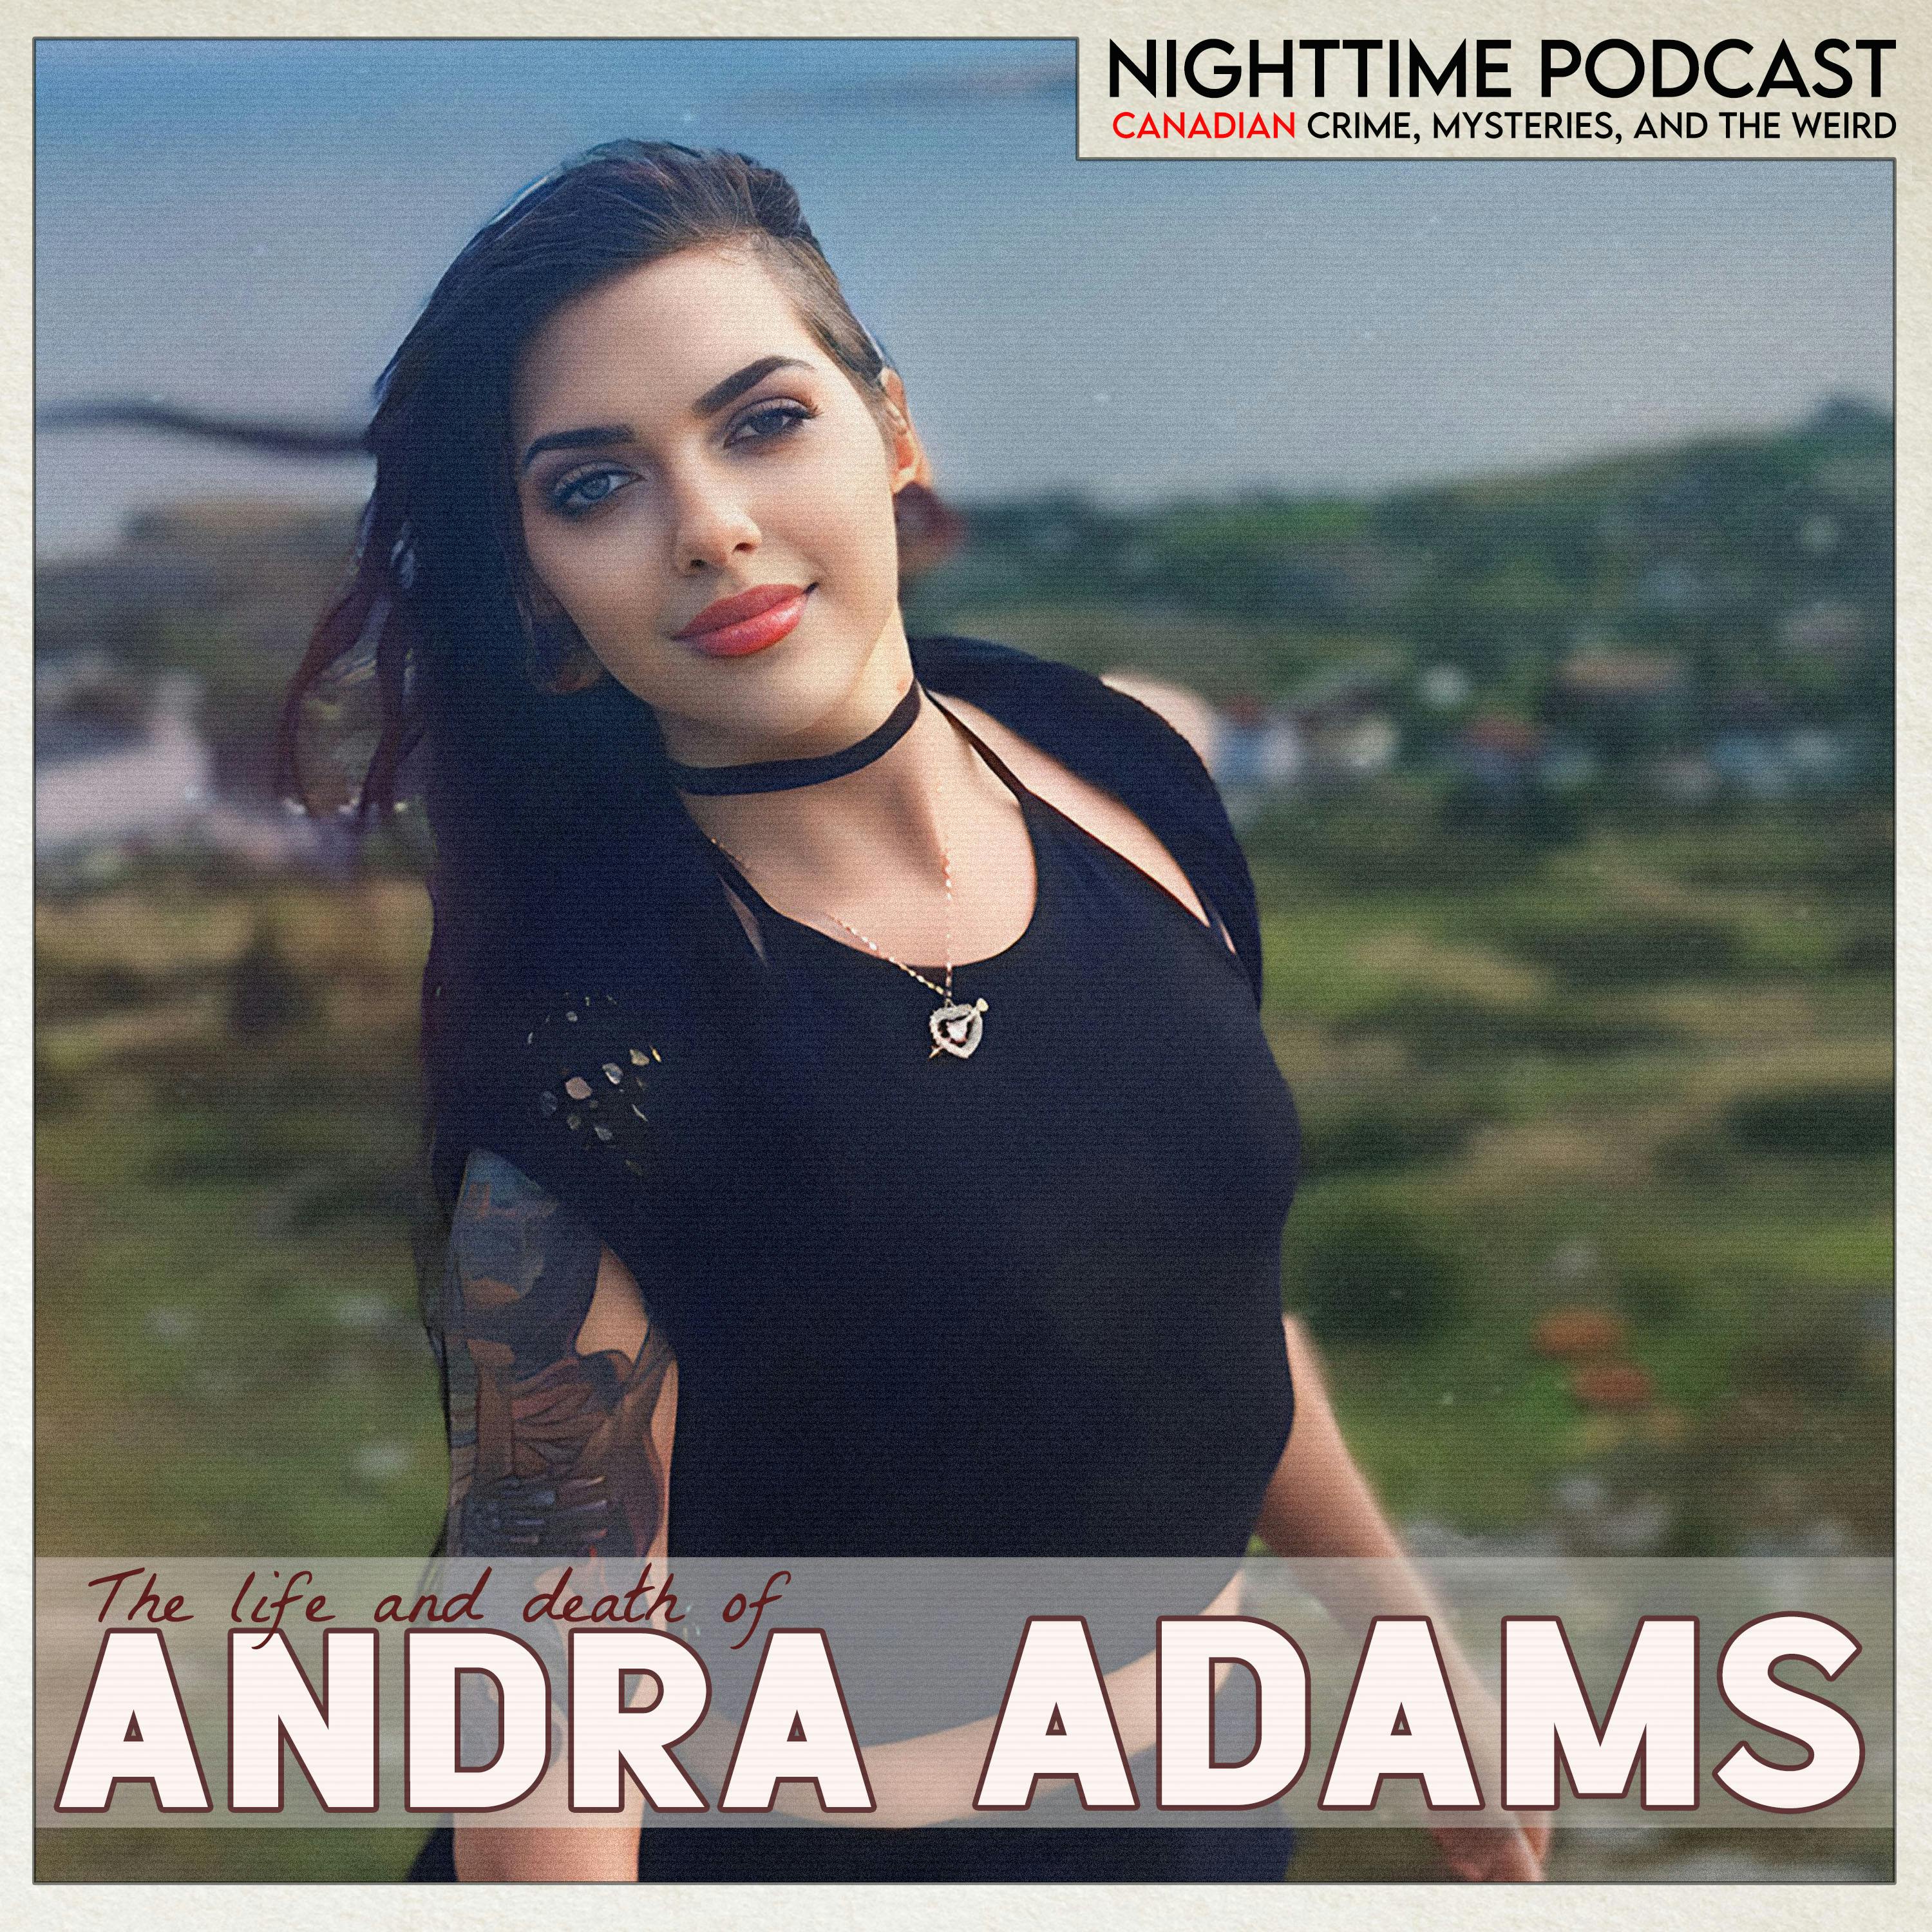 The Life and Death of Andra Adams